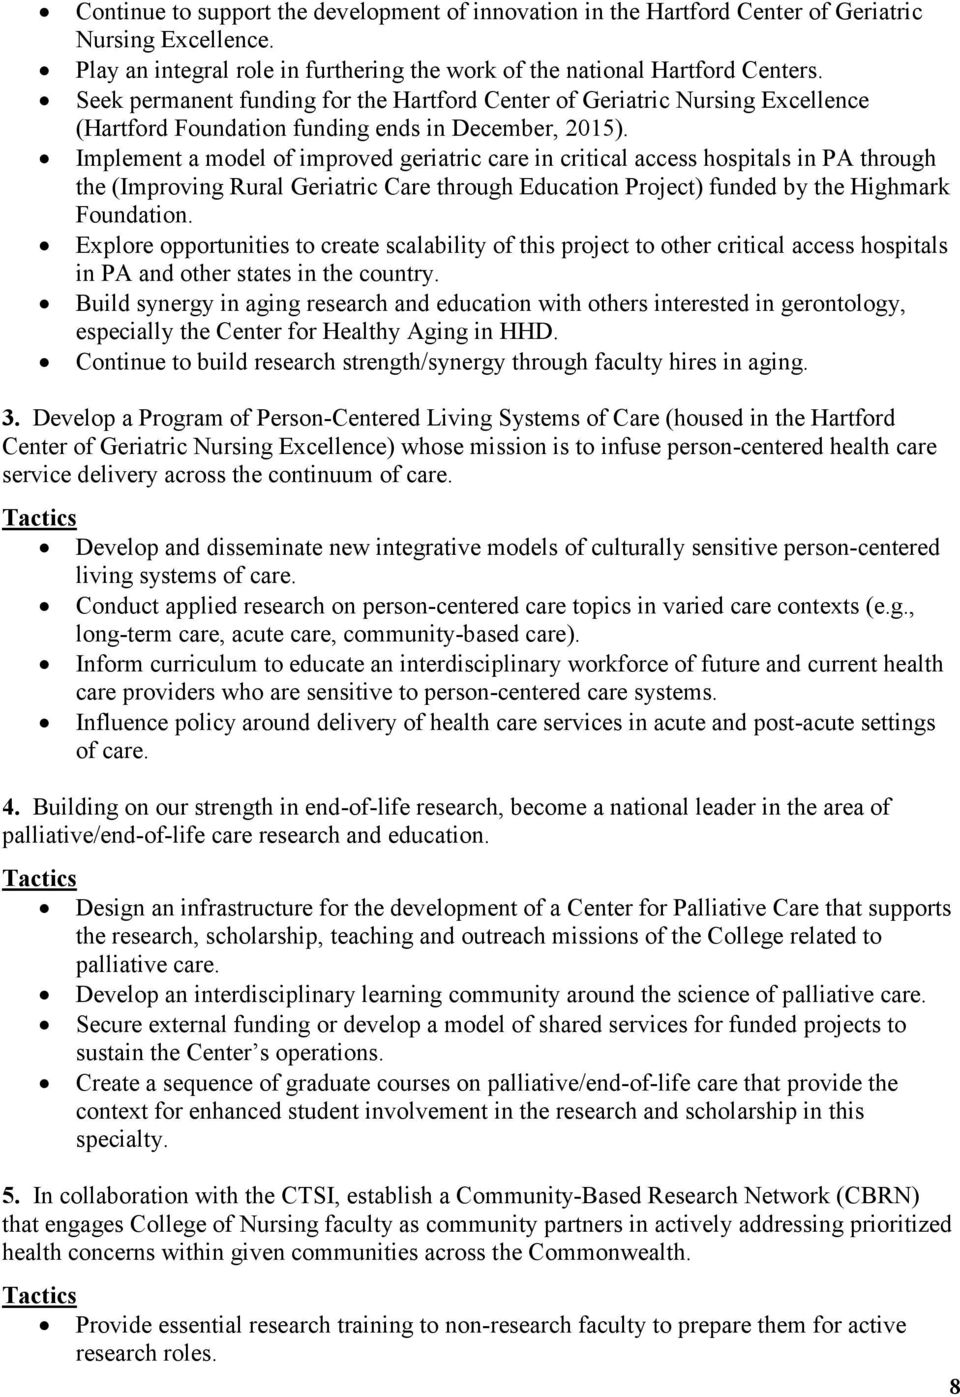 Implement a model of improved geriatric care in critical access hospitals in PA through the (Improving Rural Geriatric Care through Education Project) funded by the Highmark Foundation.